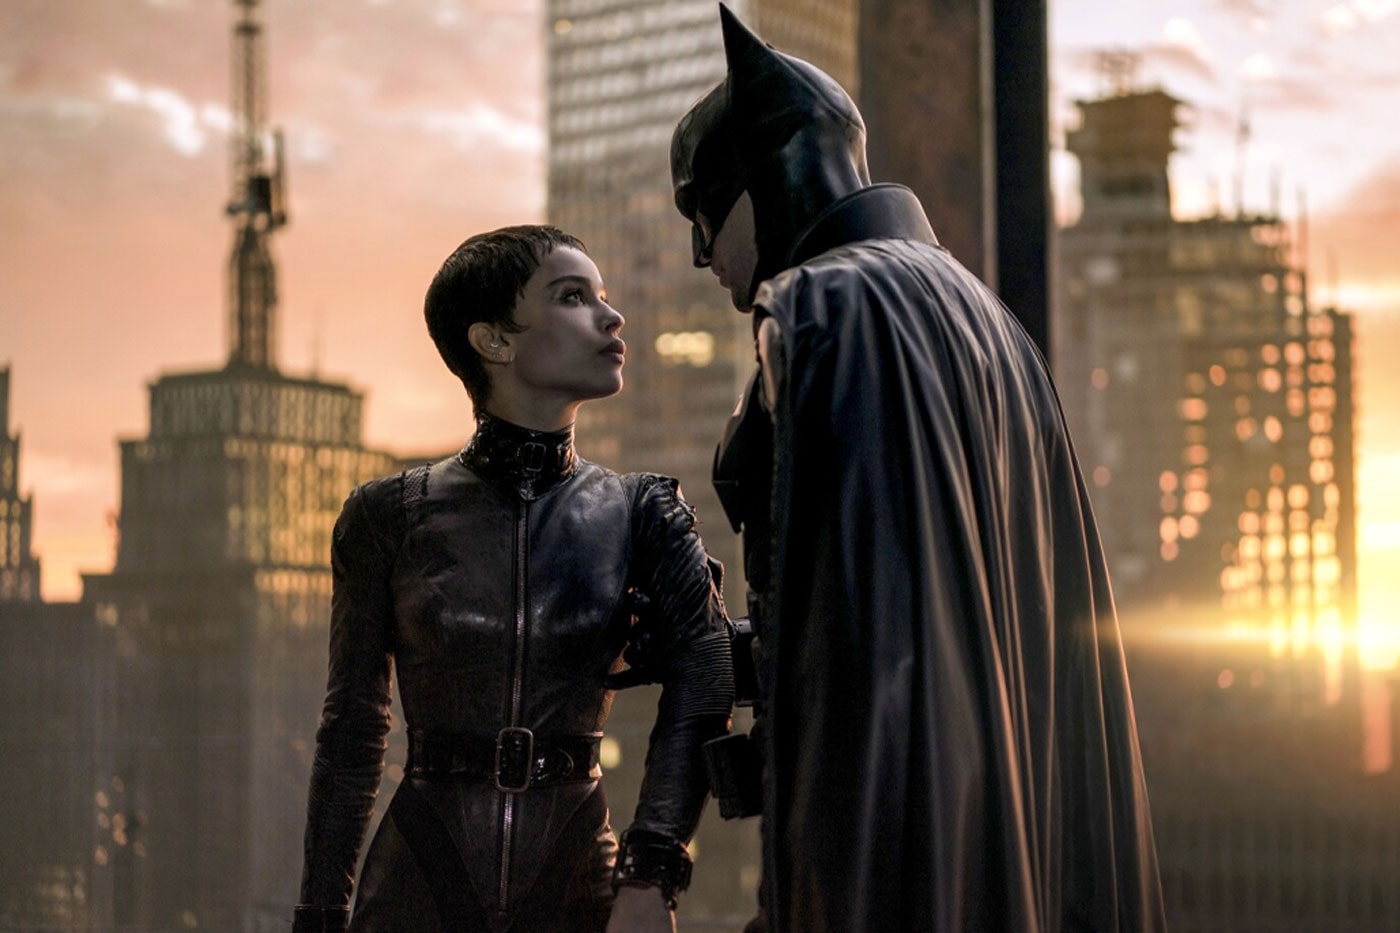 AMC Theaters Is Charging More for 'The Batman' Tickets Than Other Films demand-based pricing zoe kravitz robert pattinson matt reeves dc comics warner bros